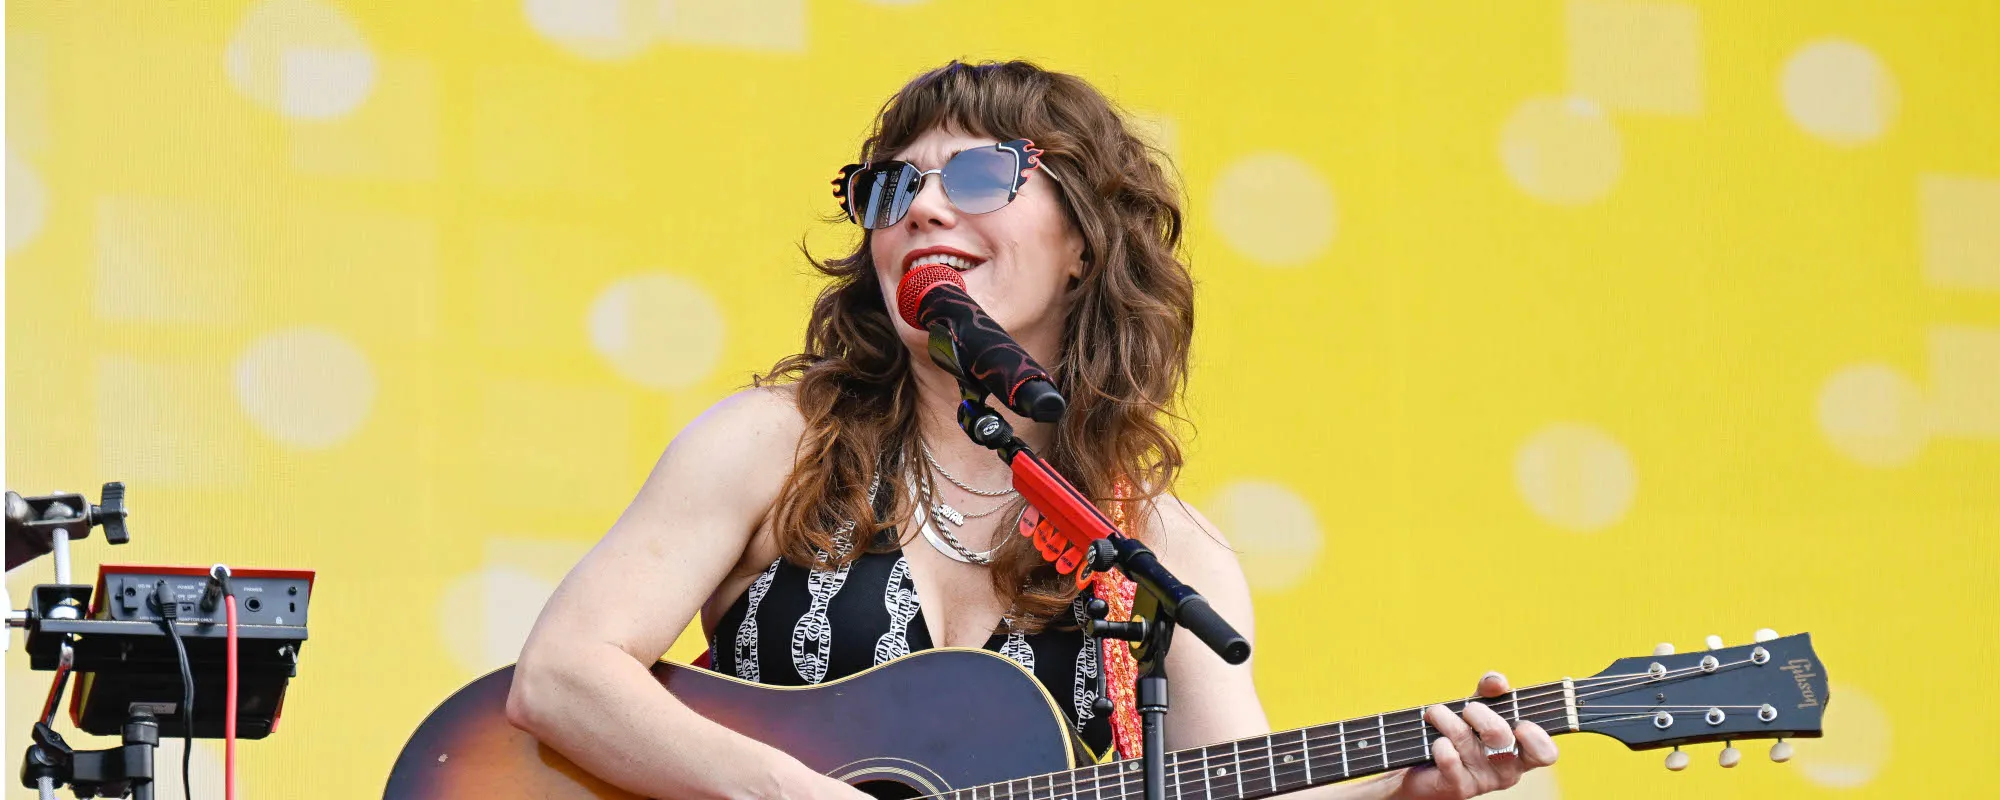 Jenny Lewis on The Postal Service, Touring with Ben Gibbard and LP ‘Joy’All’